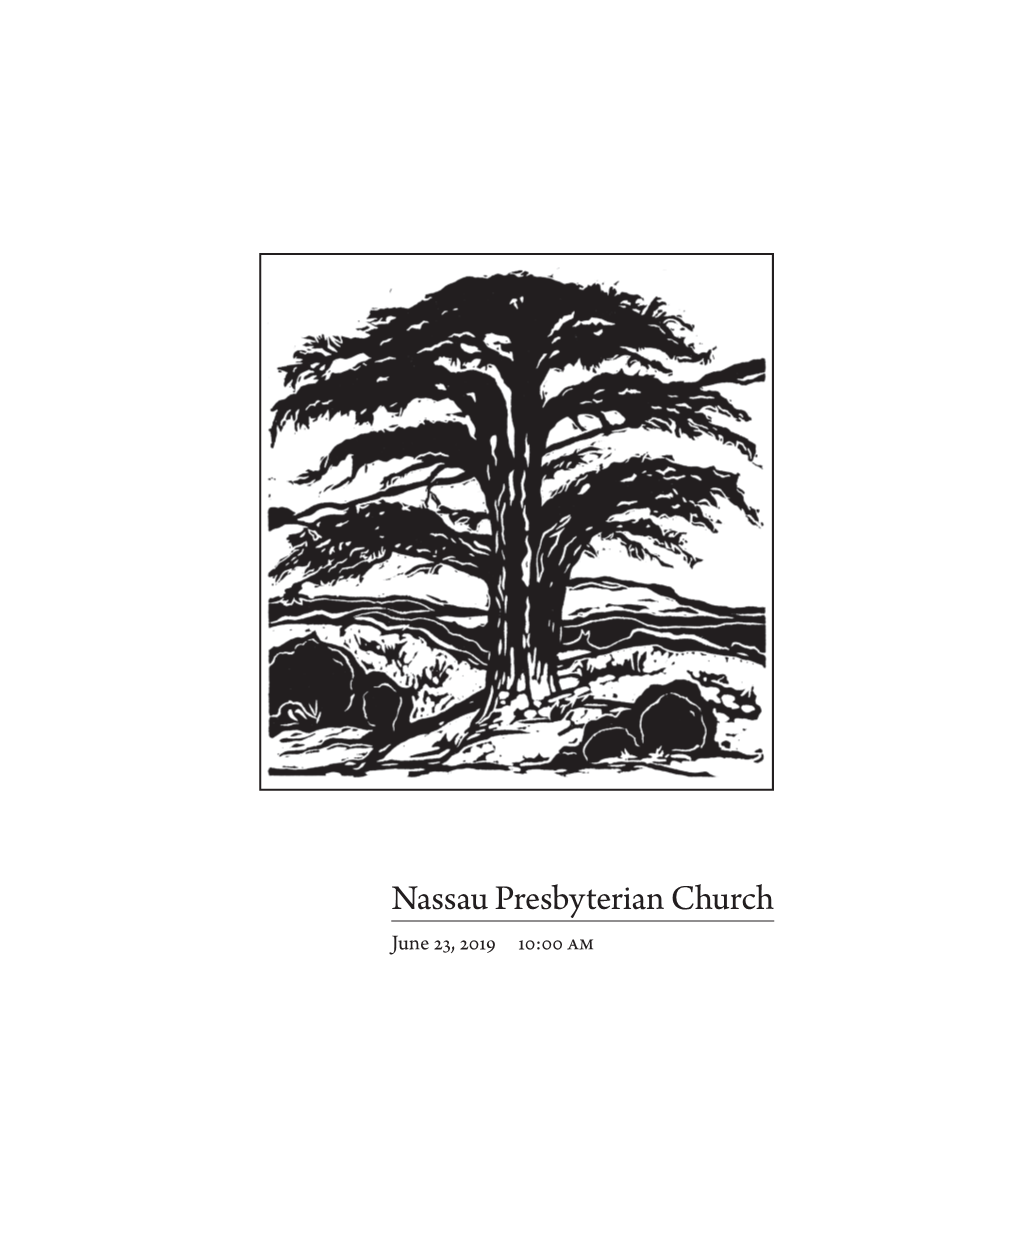 Nassau Presbyterian Church June 23, 2019 10:00 Am God Calls Us Together to Offer Praise, Acknowledge Sin, Gathering and Celebrate Our Adoption As Forgiven Children